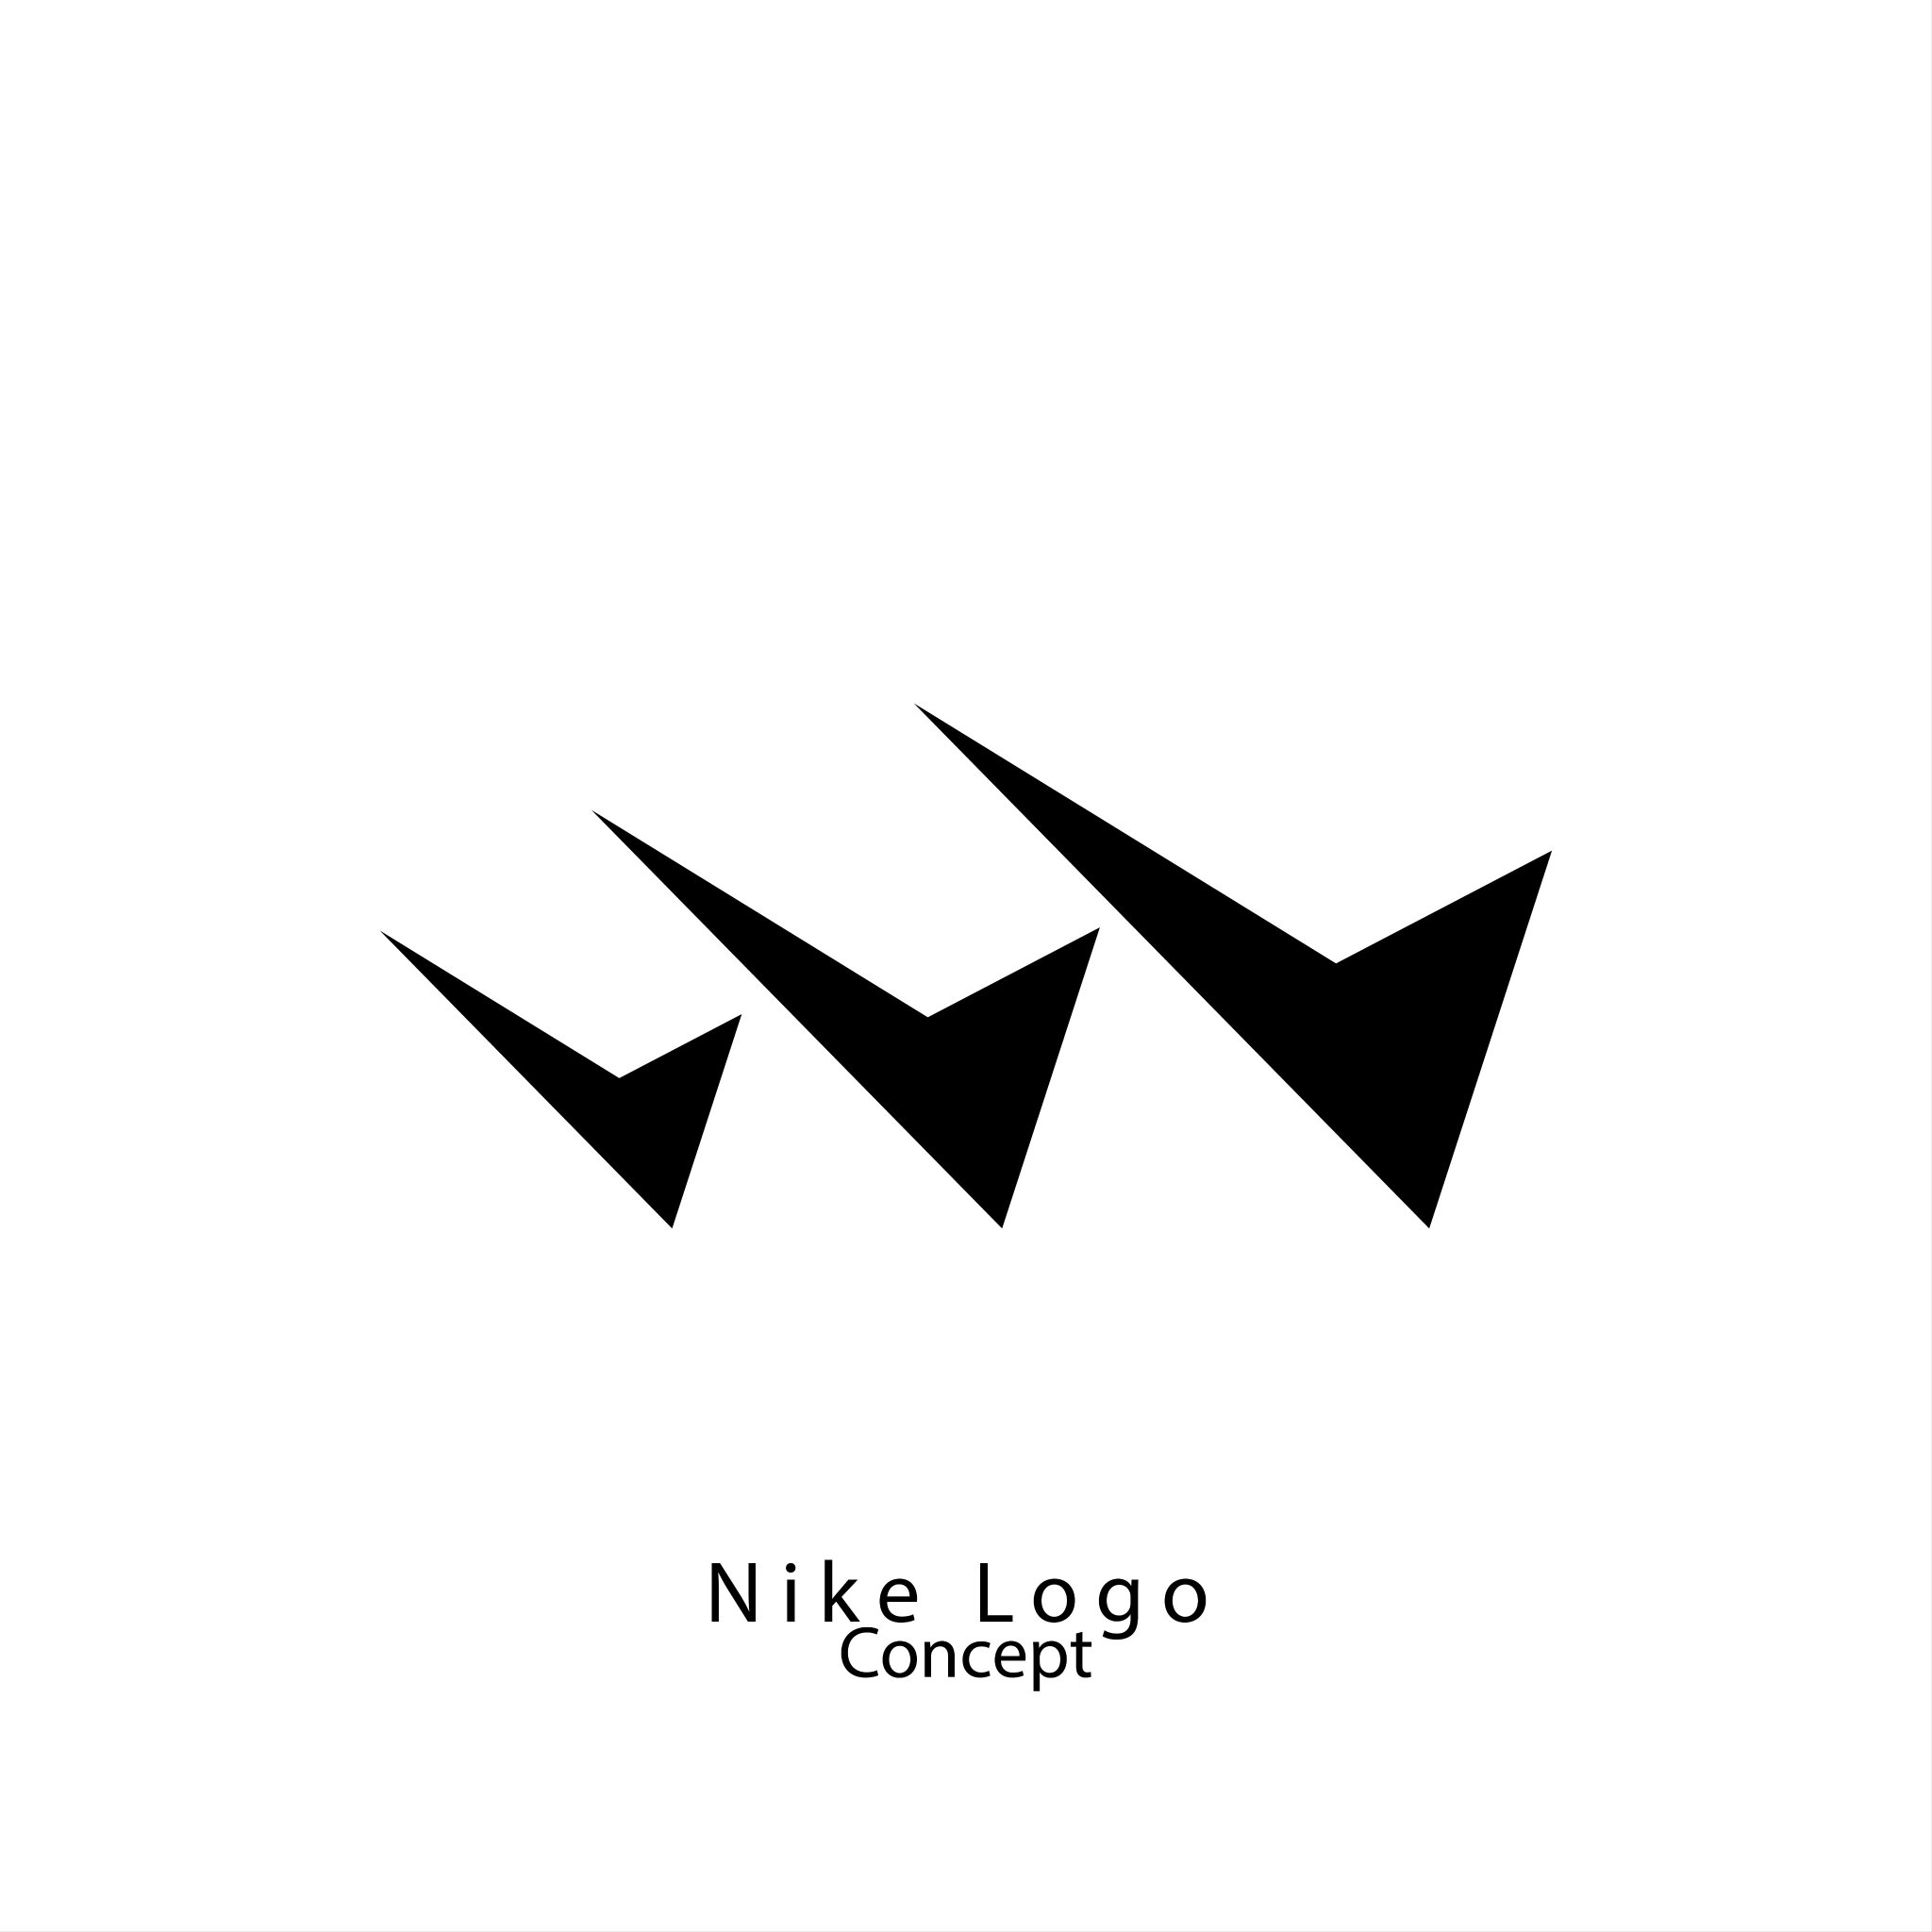 ASTDesigns on Twitter: "nike logo concept. thoughts? #logoinspirations #neverstopcreating #designlife #logolearn #brandidentity #graphicdesign #graphicdesigner #greatlogo #designer #design #branding ...